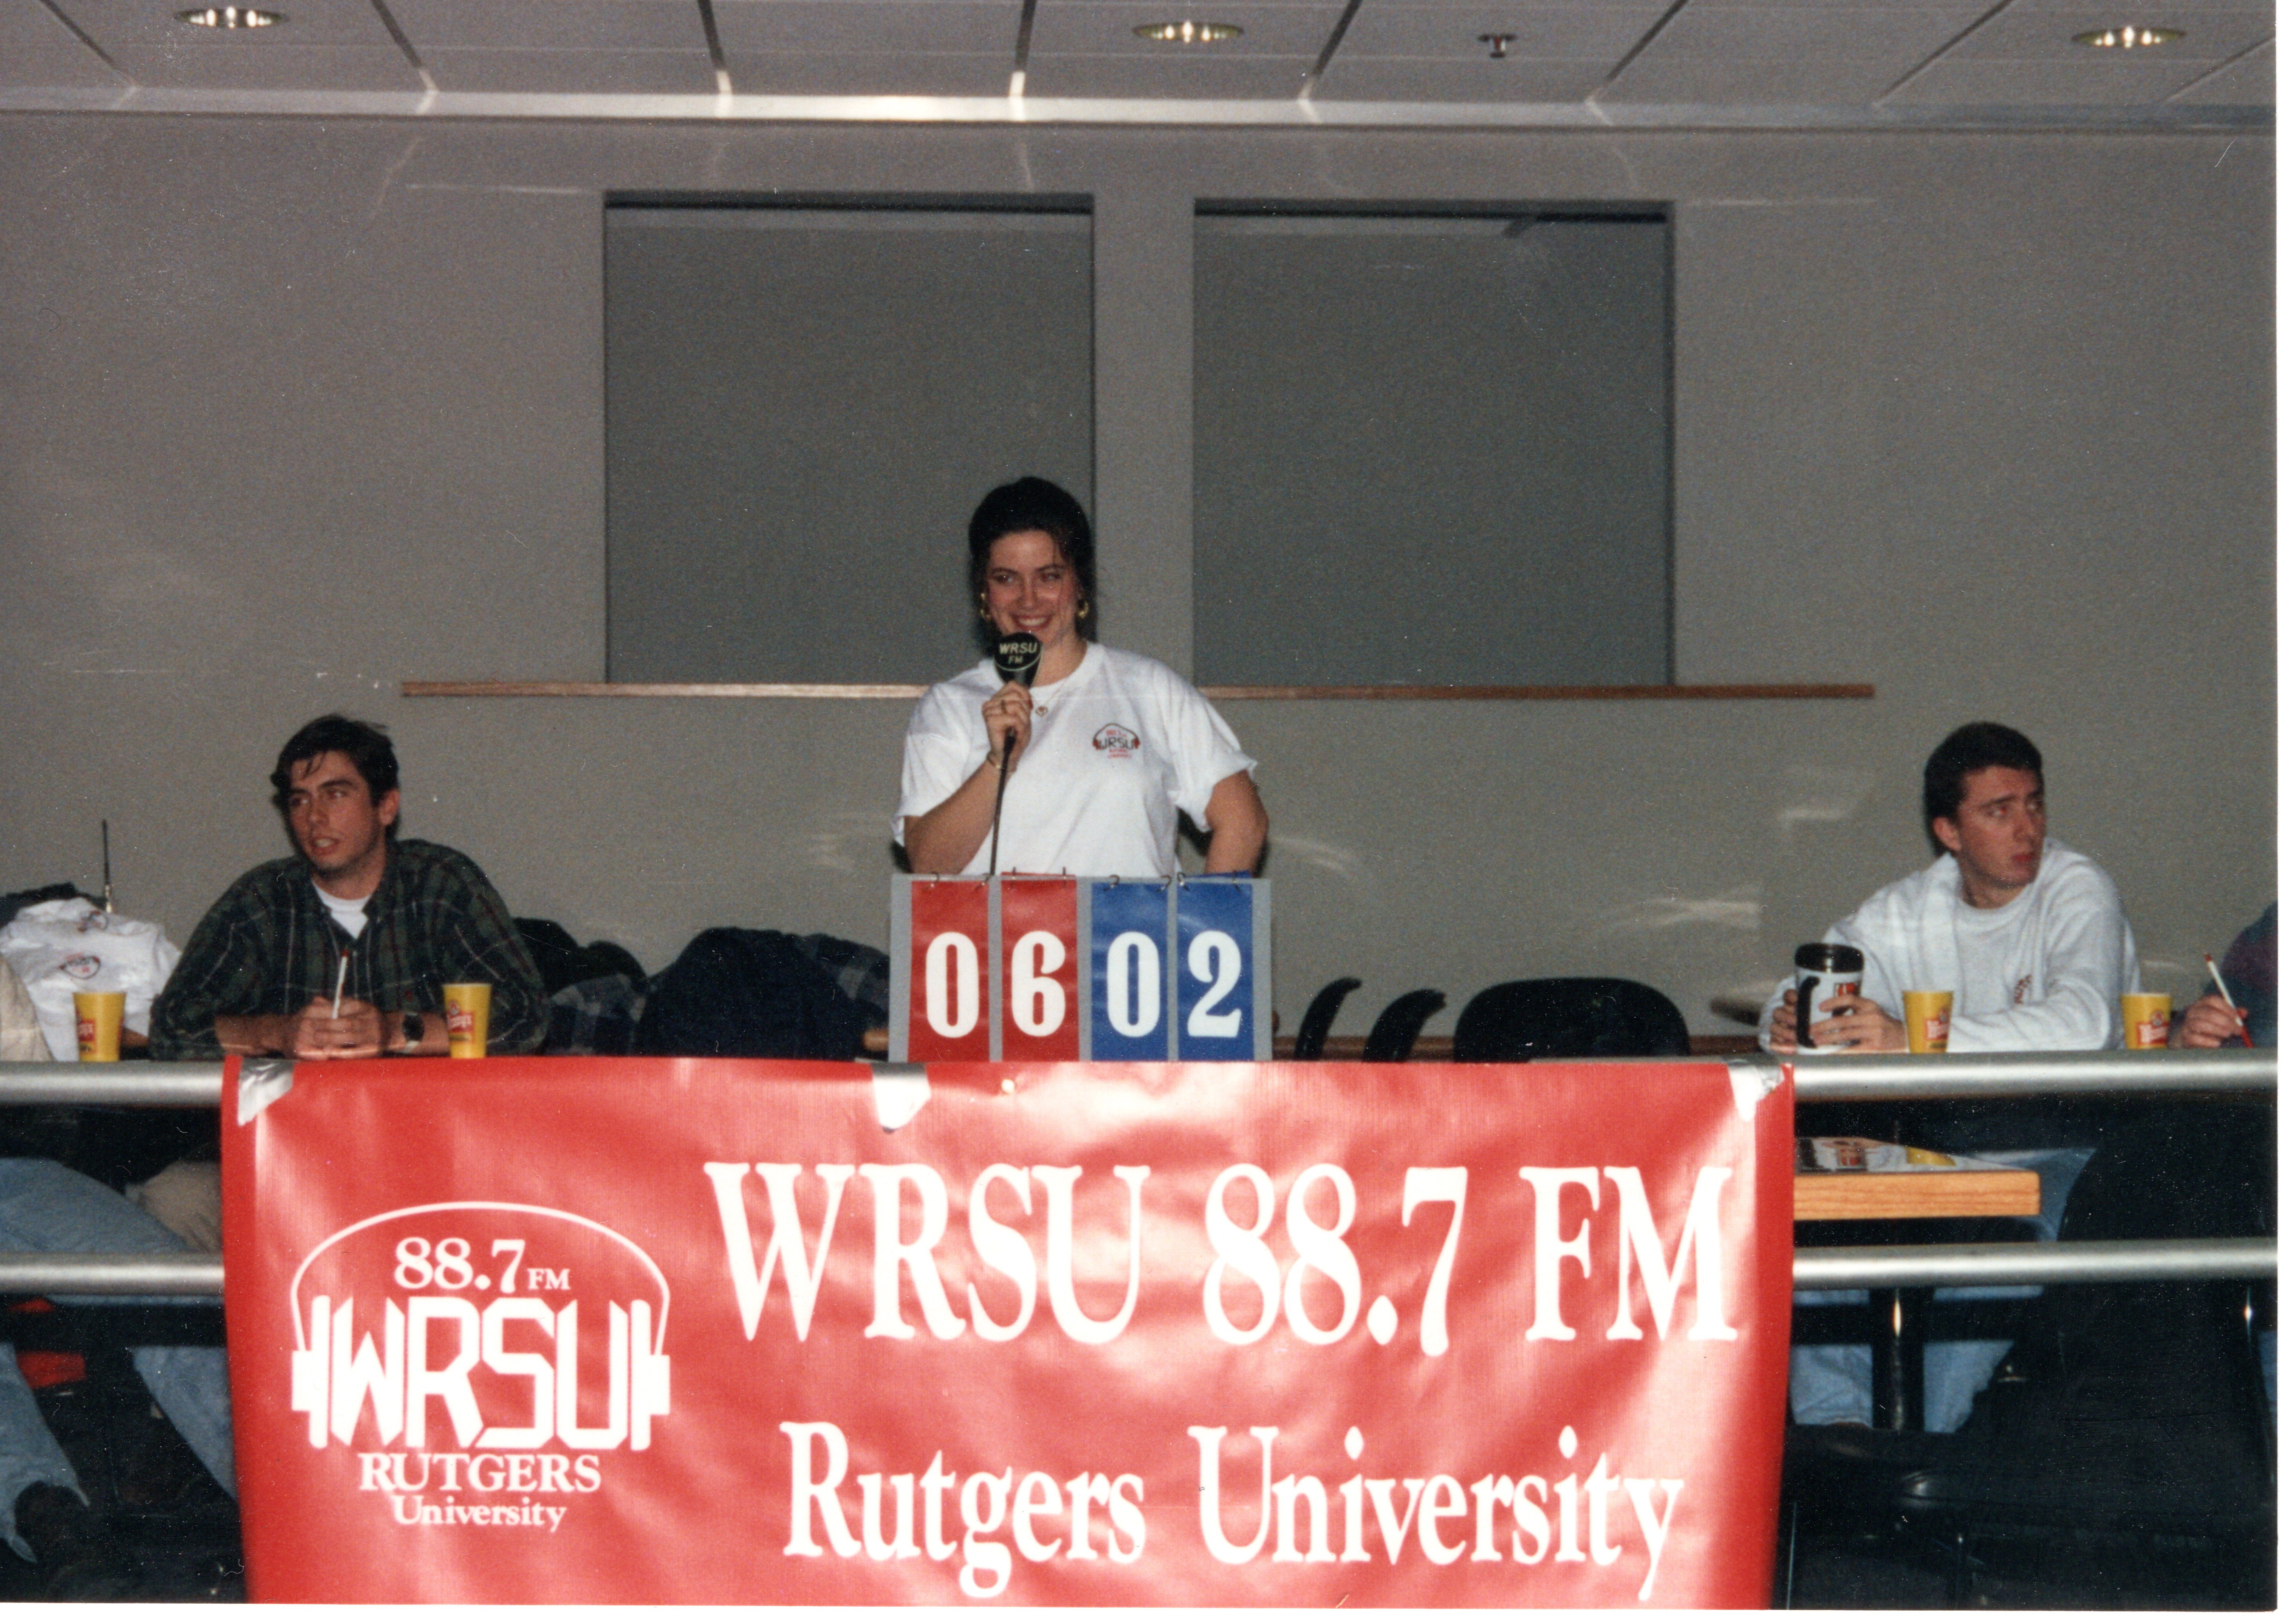 1995 The Quiz Show - From the Food Court of the Student Center 6